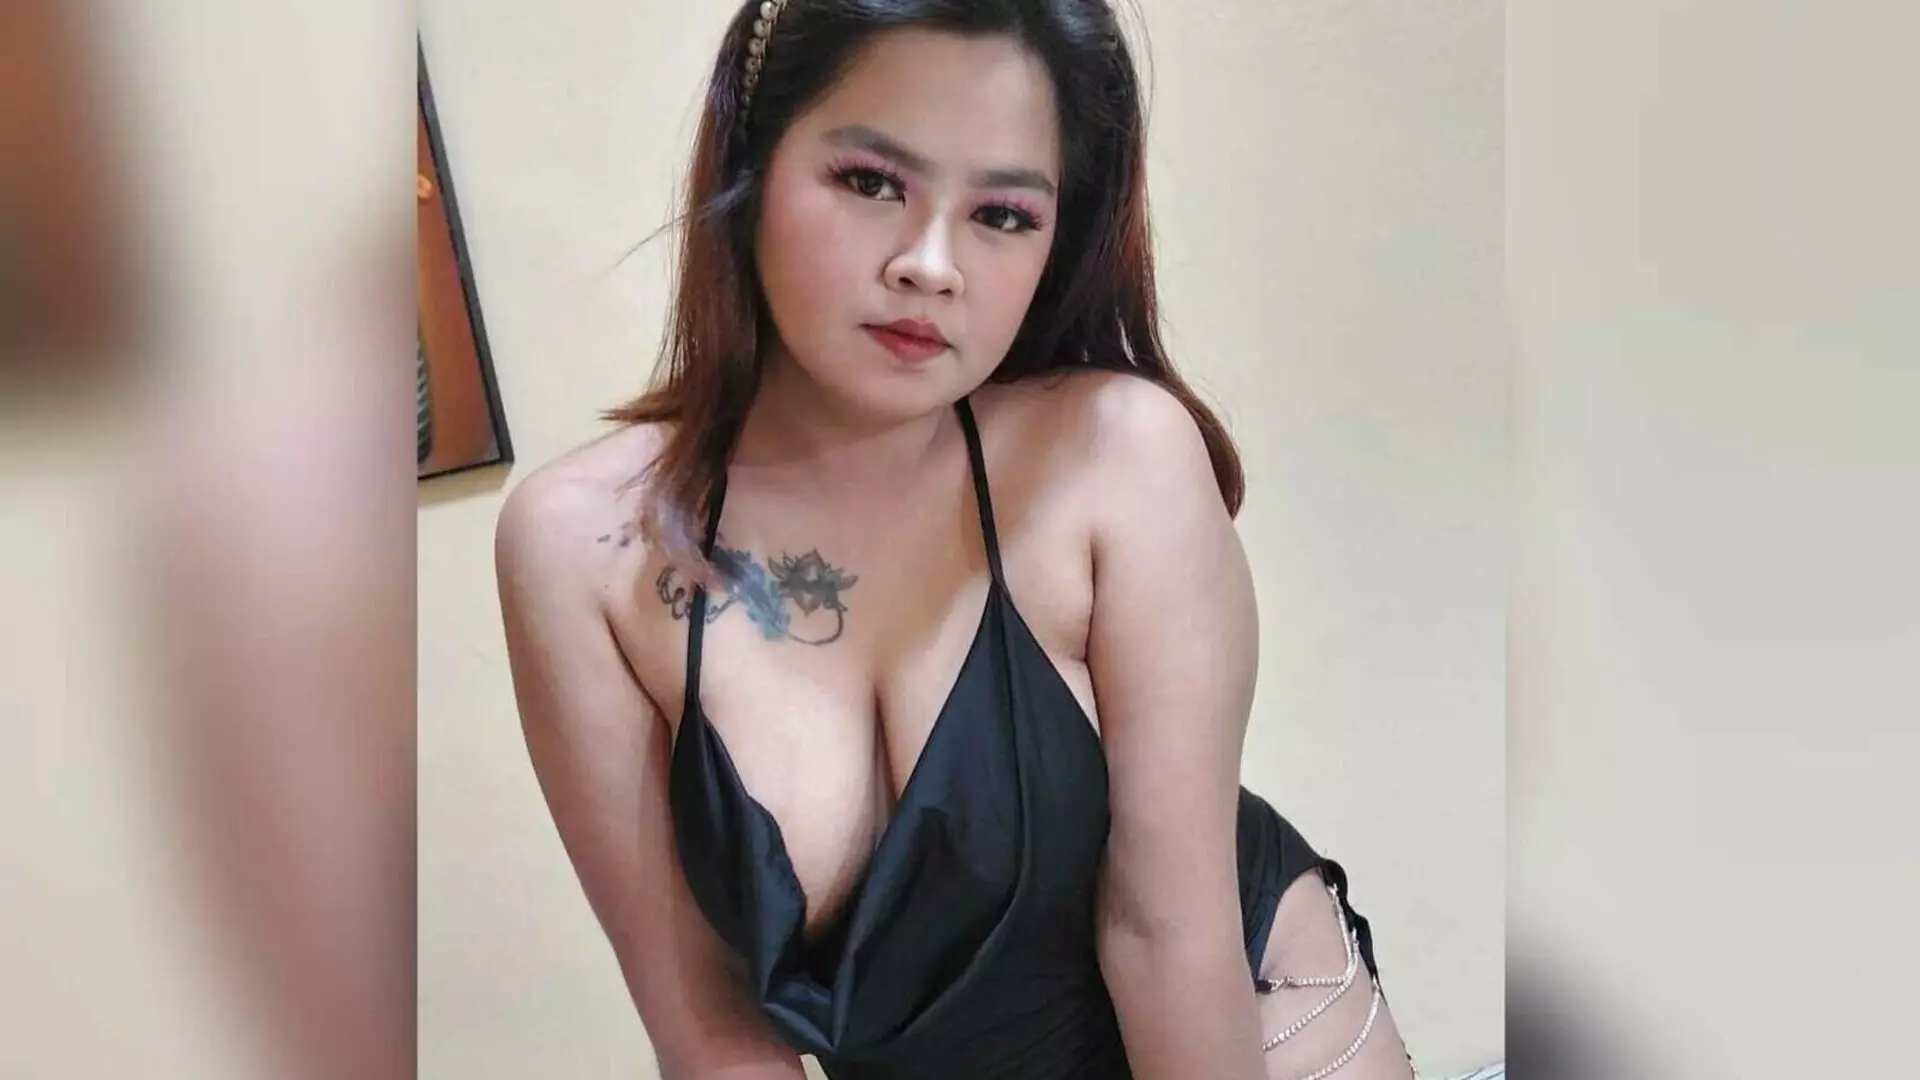 Join JoyceCarla Private Chat